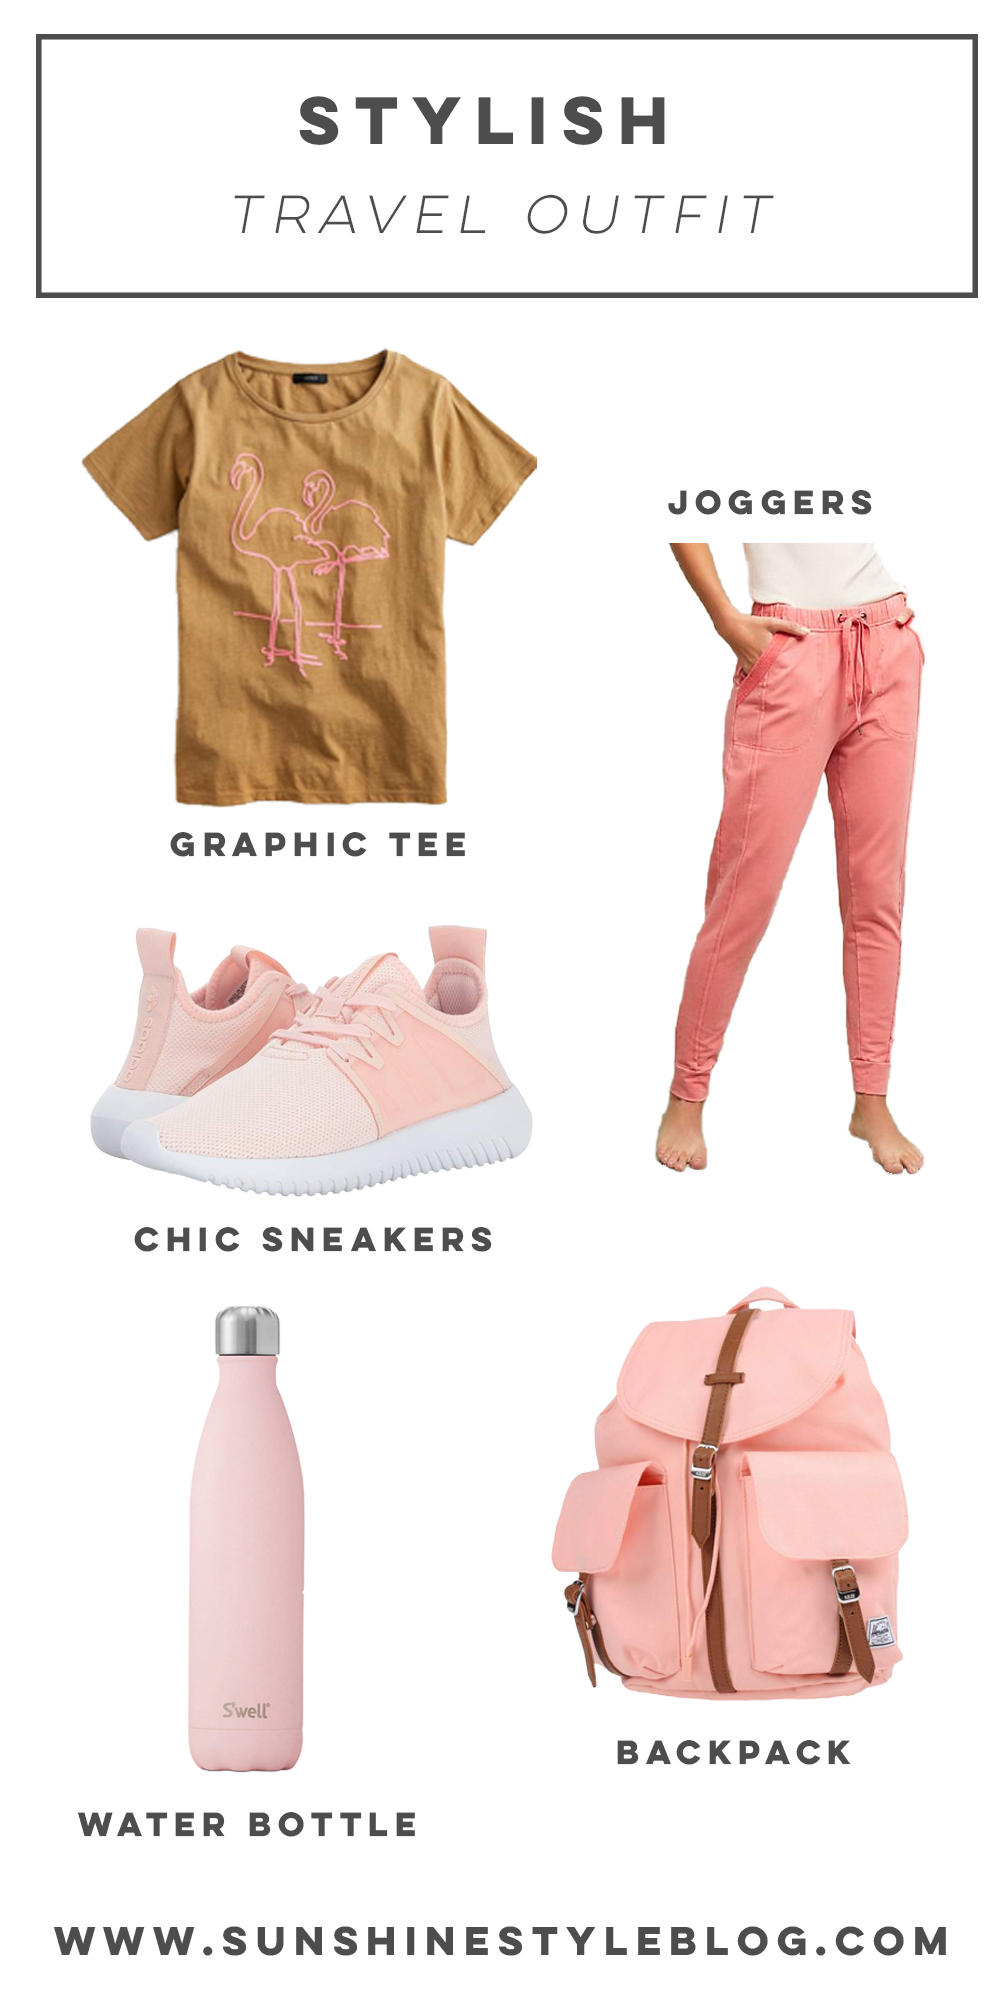 What to Wear When Traveling: A Stylish Travel Outfit Featuring Anthropologie Joggers, Swell Water Bottle, J.Crew T-Shirt, Adidas Sneakers and Aerie Sweatshirt